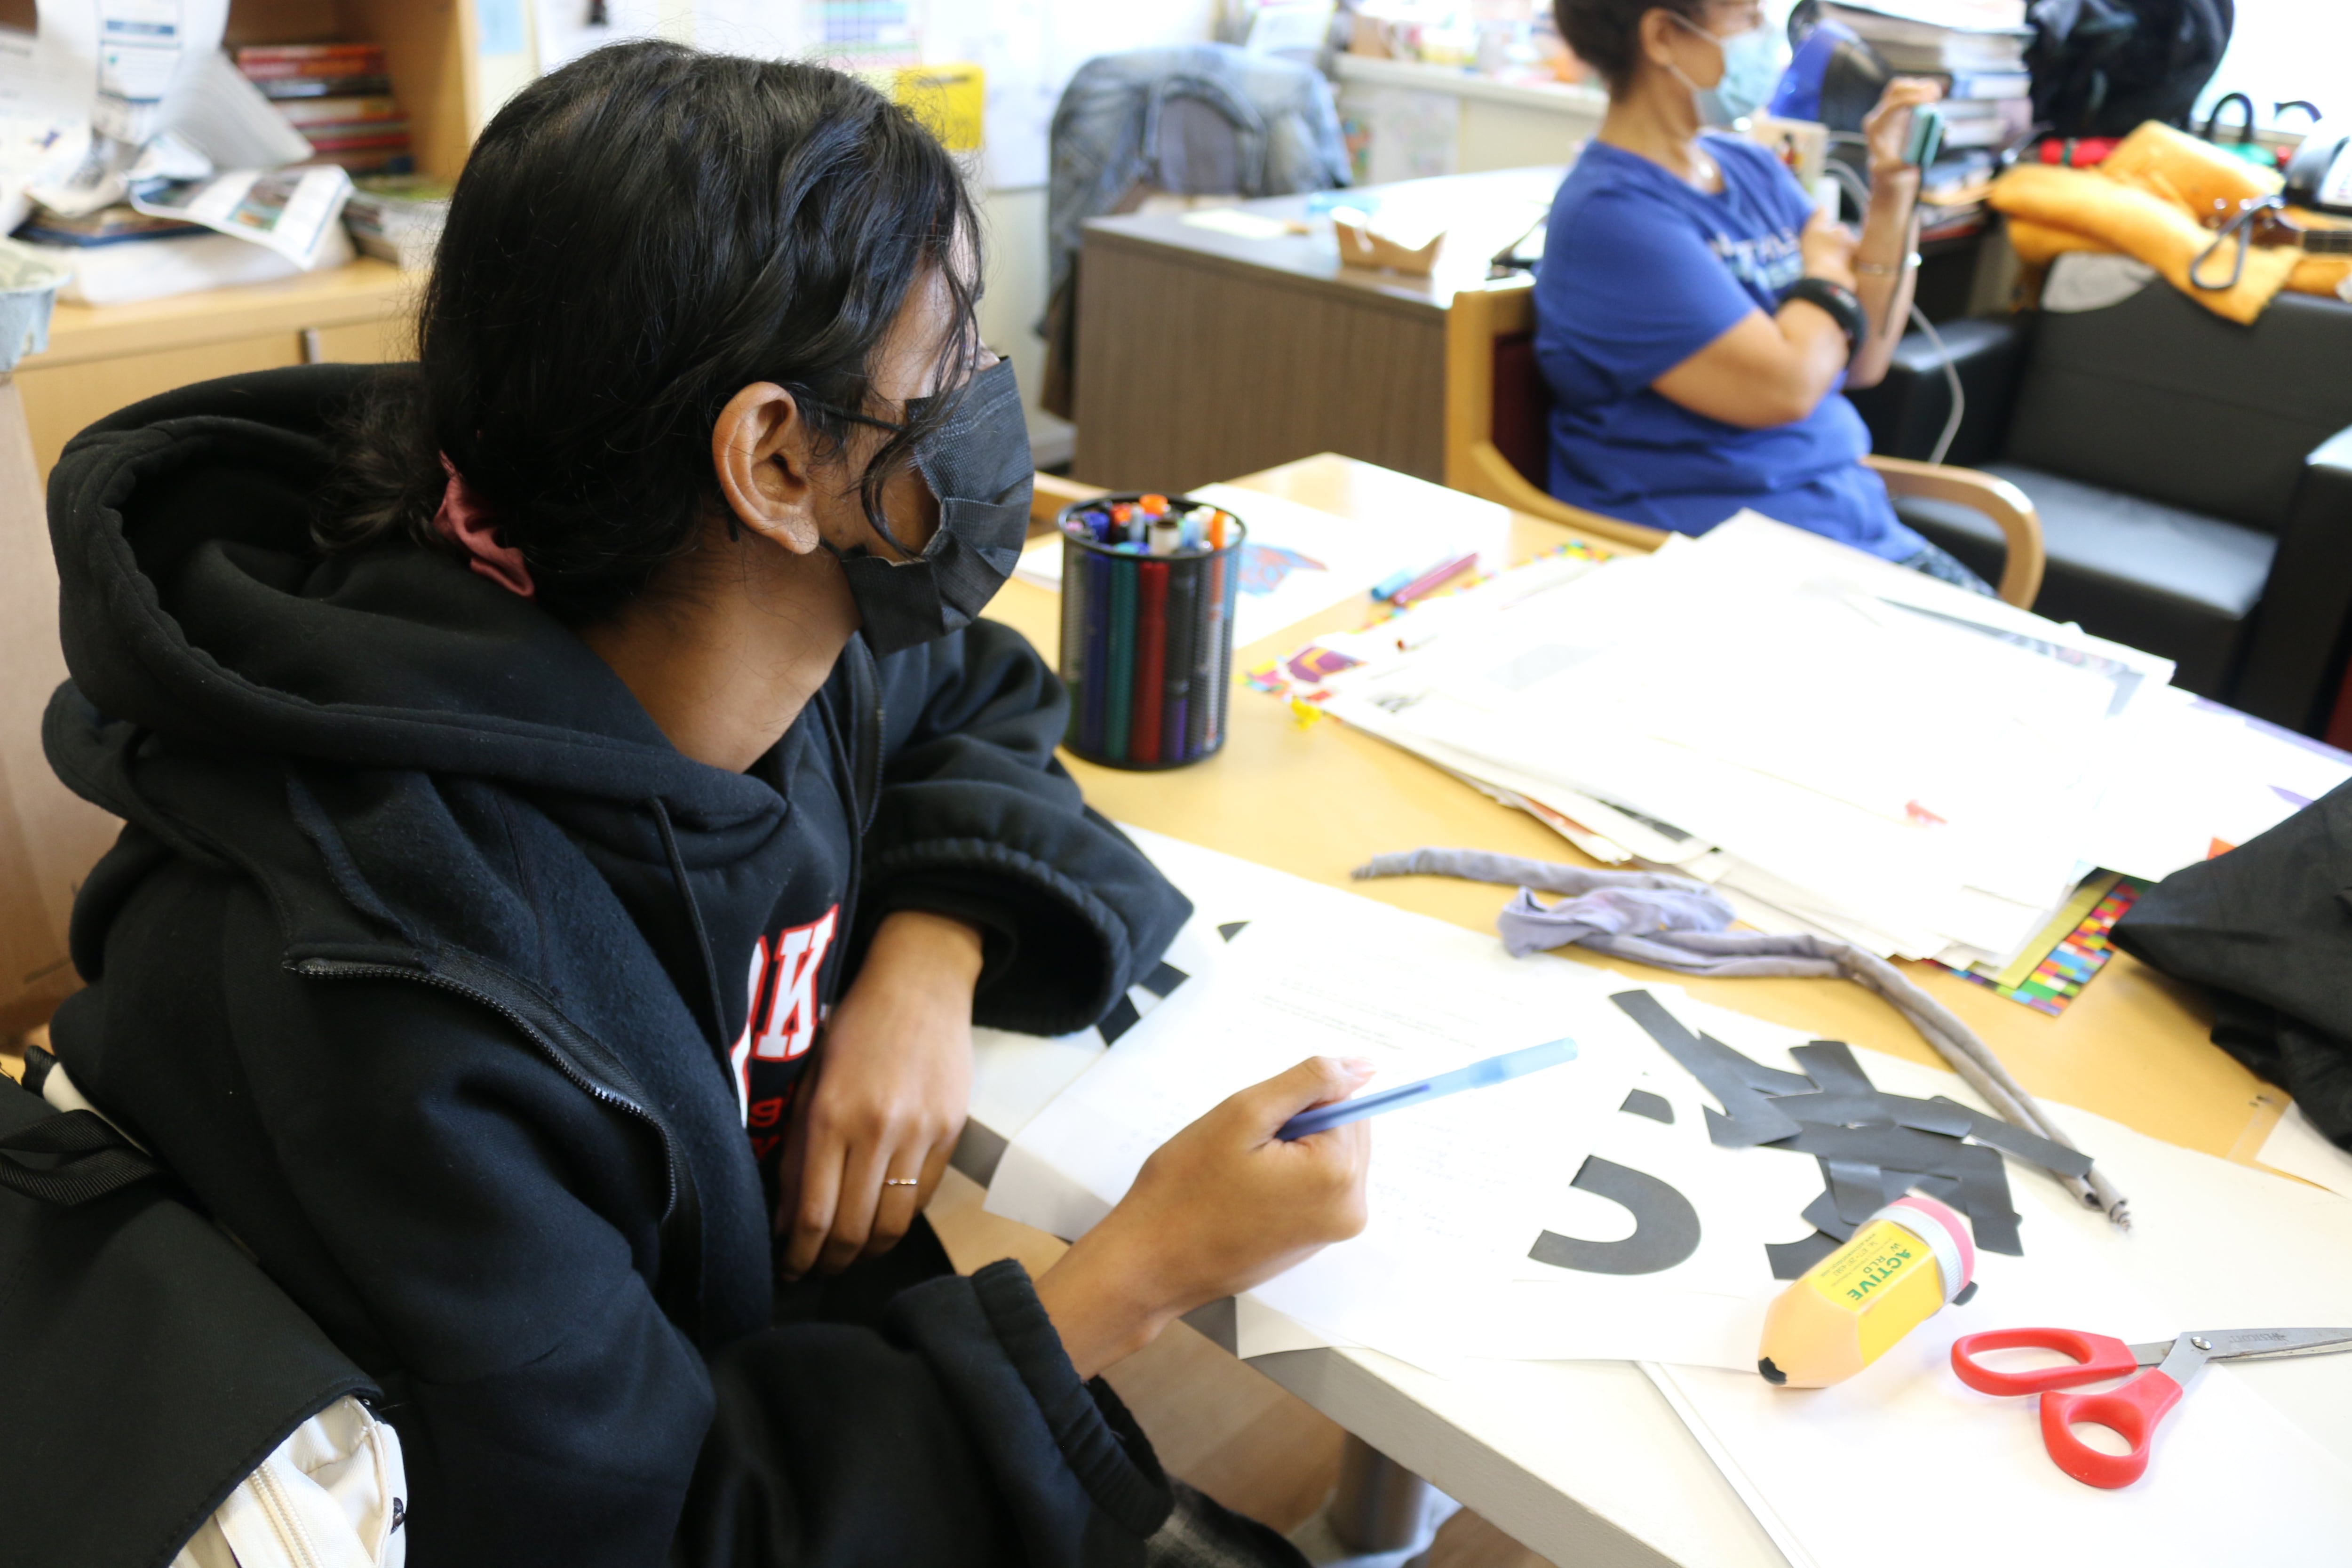 A student wearing a black hoodie and protective mask works at their desk during class.